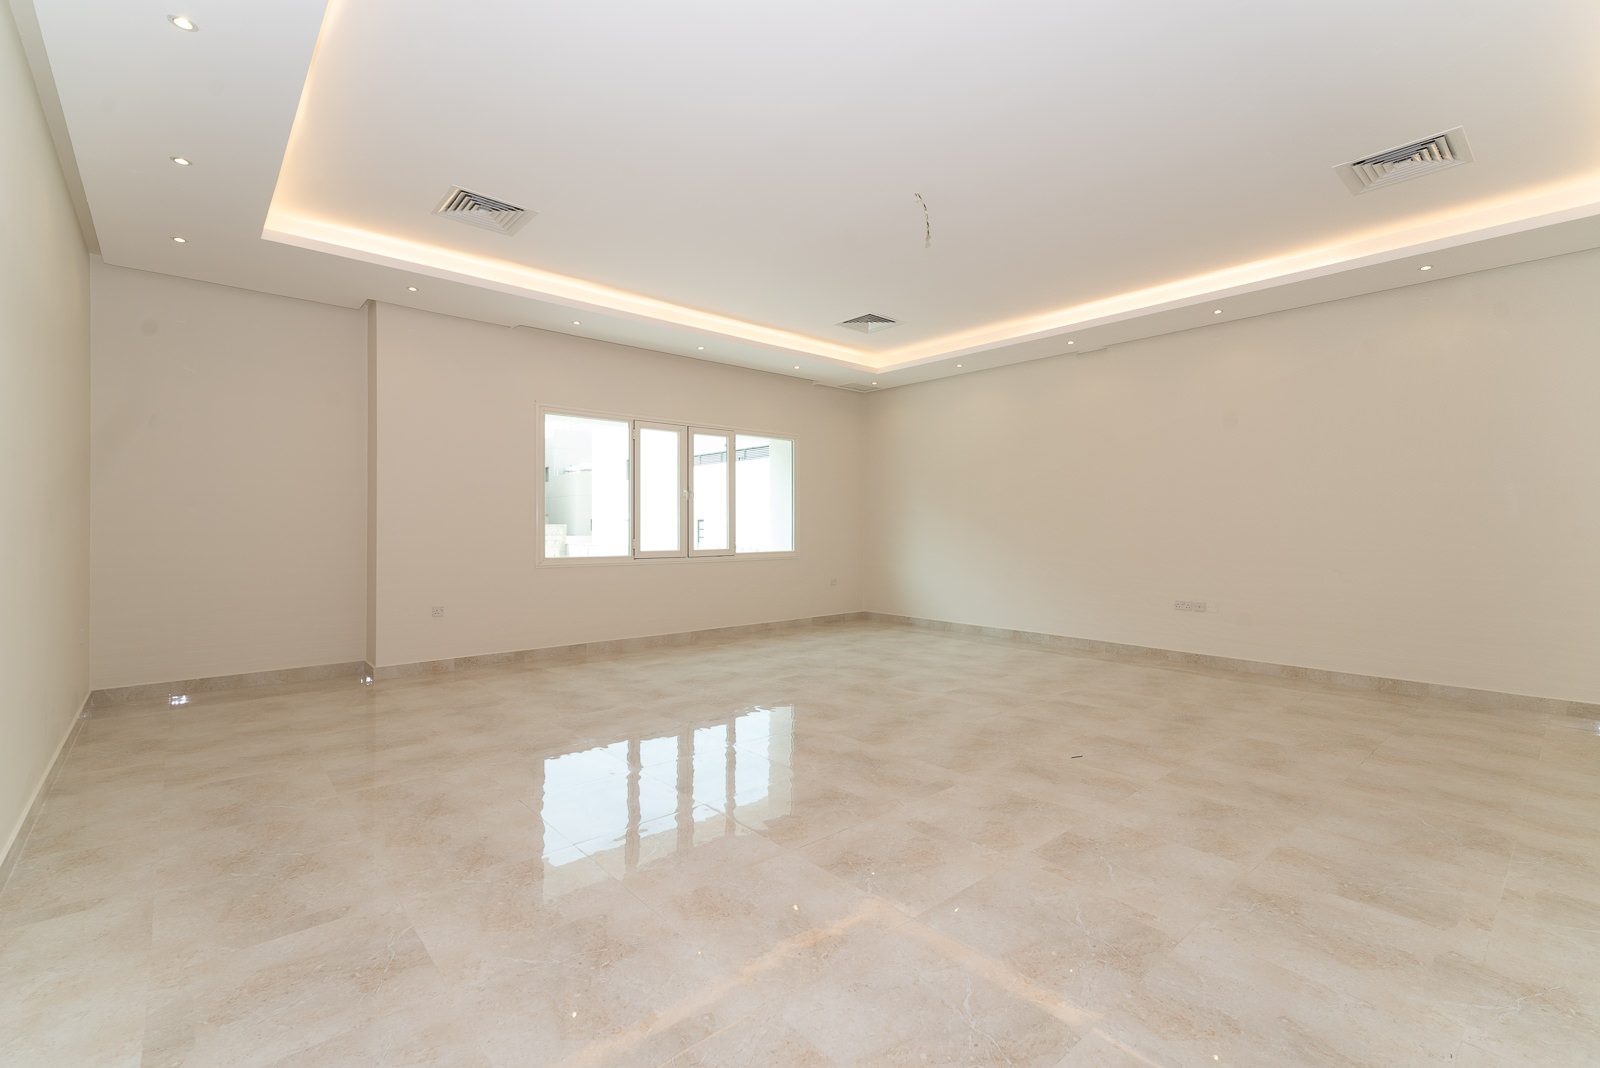 Masayel – new, spacious, unfurnished four bedroom floor